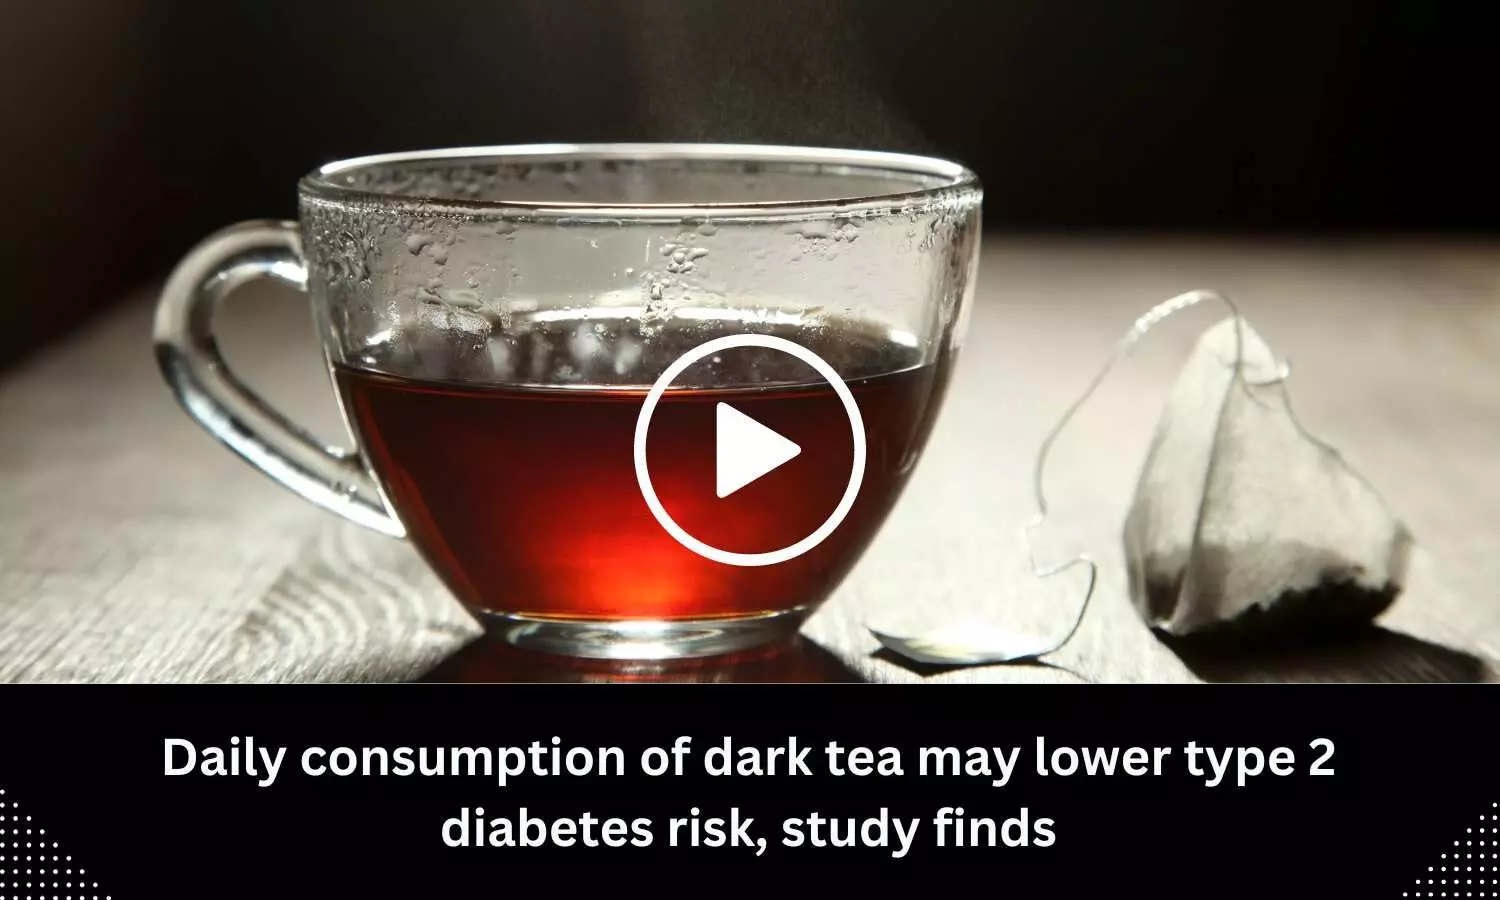 Daily consumption of dark tea may lower type 2 diabetes risk, study finds